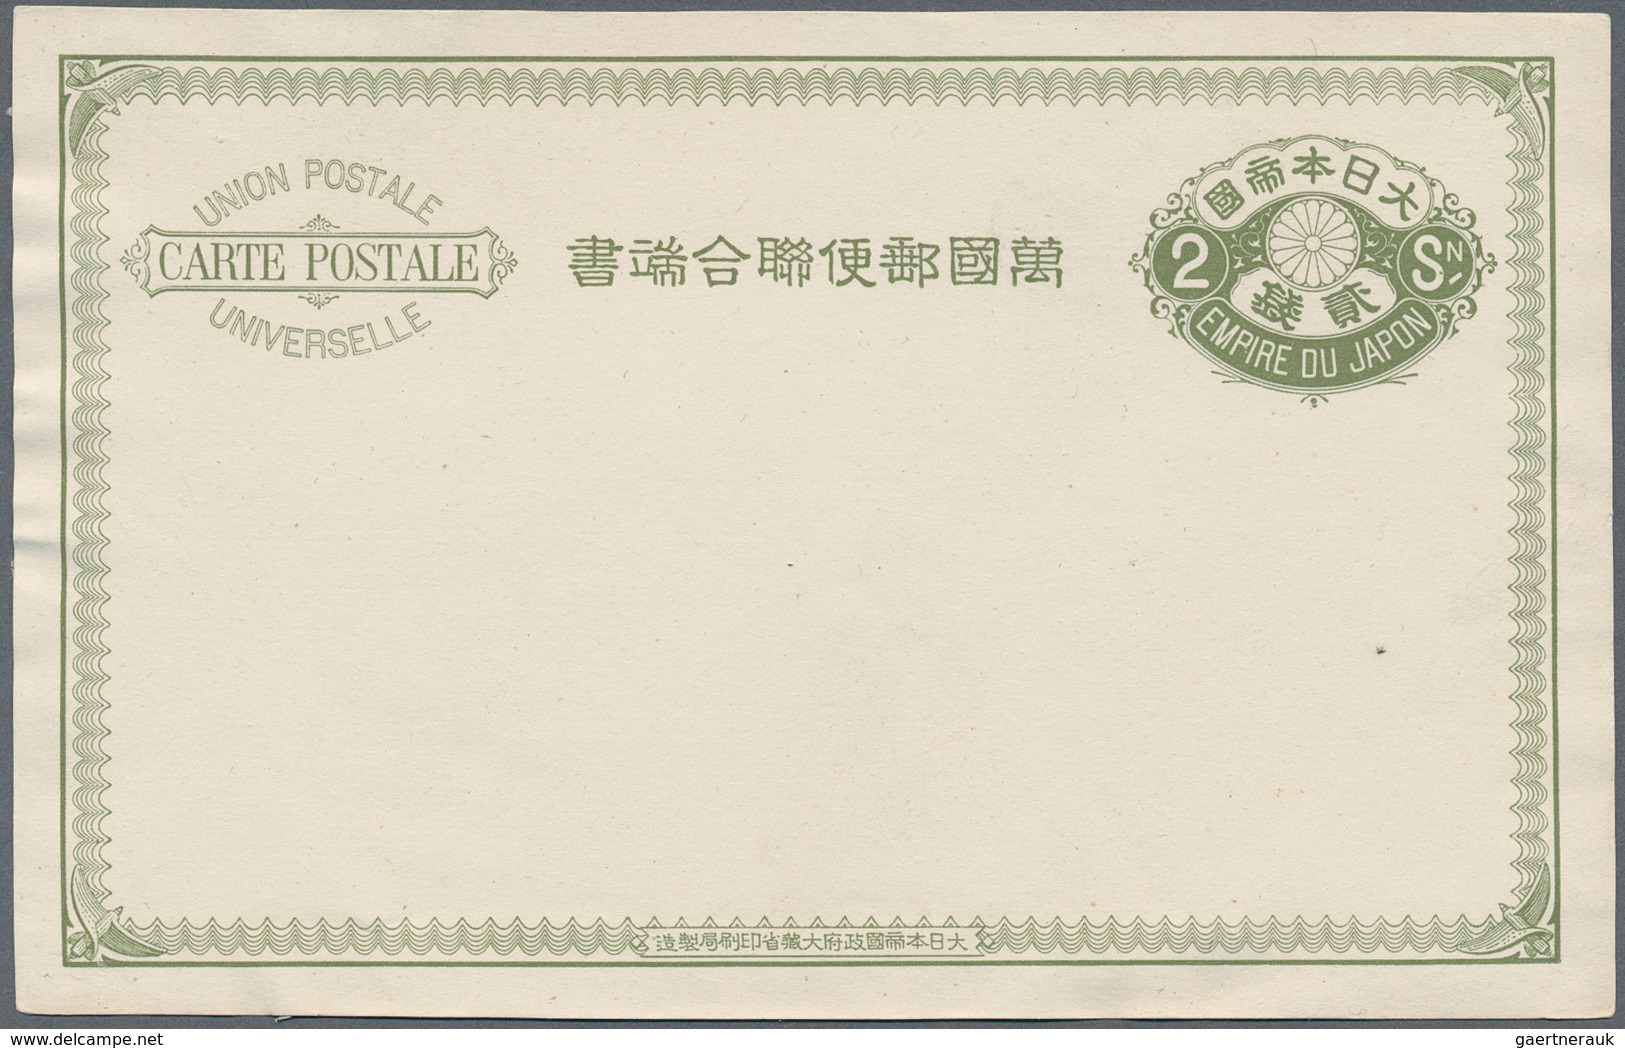 22954 Japan - Ganzsachen: 1873/1960, mint only collection of 94 almost all different cards/UPU-cards/wrapp